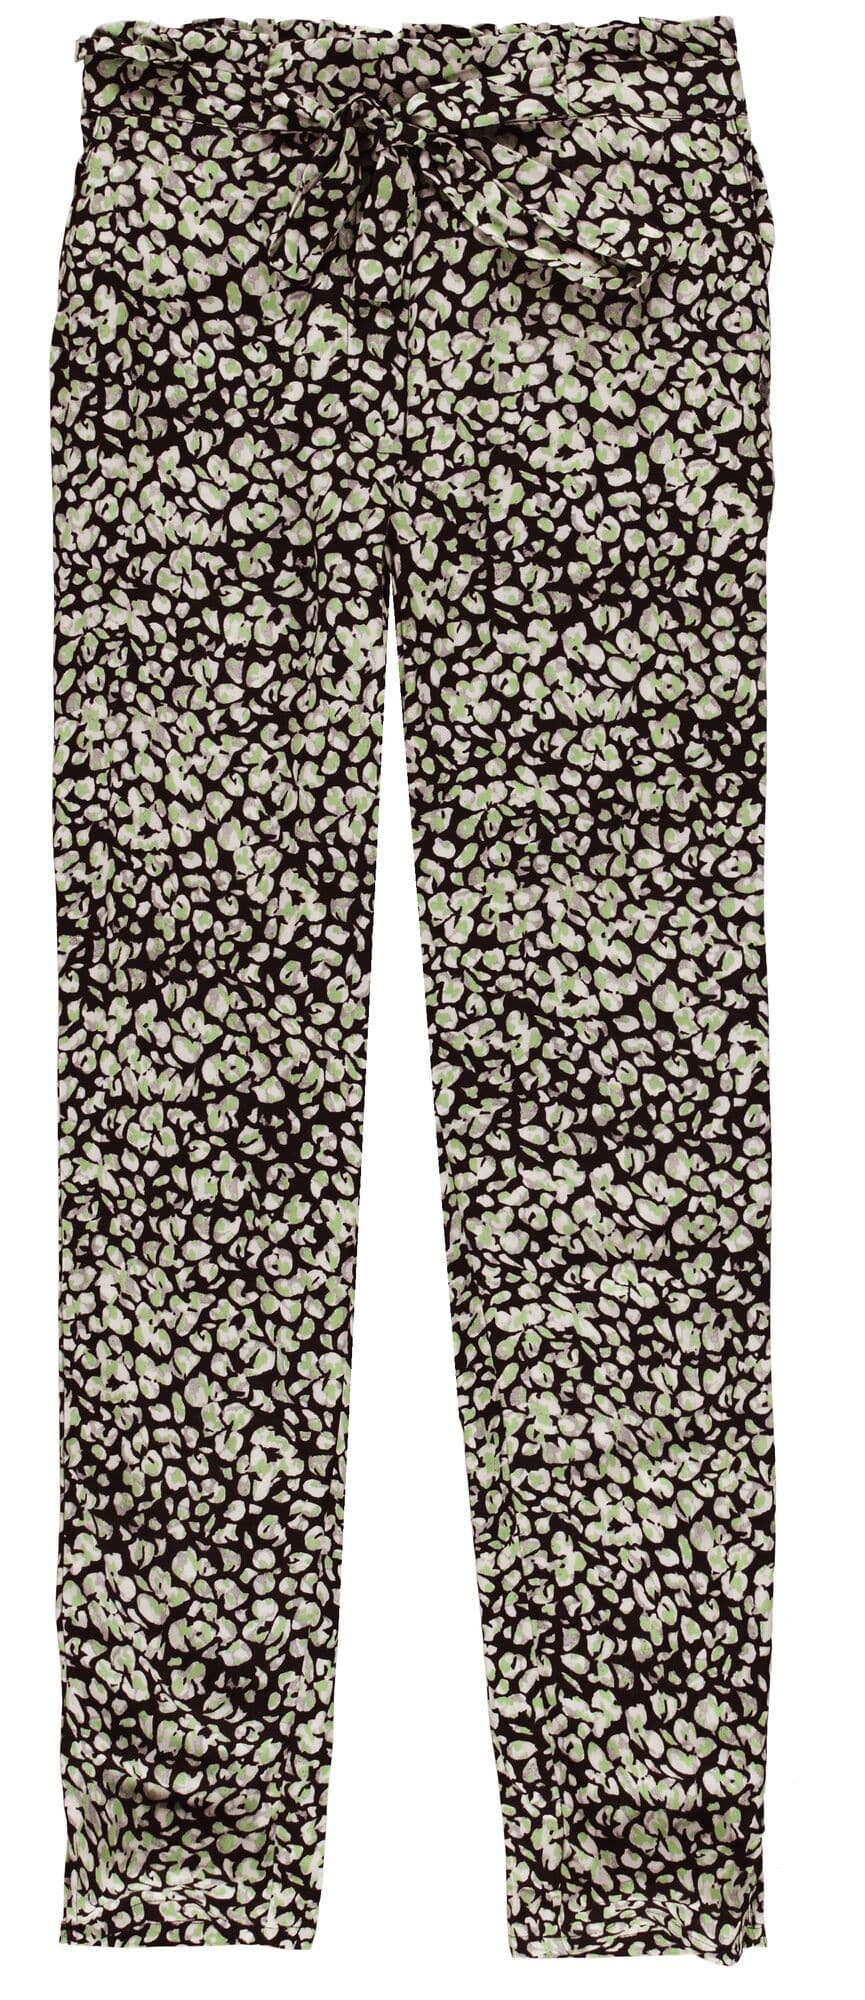 Garcia black trousers with dotted print - Your Style Your Story